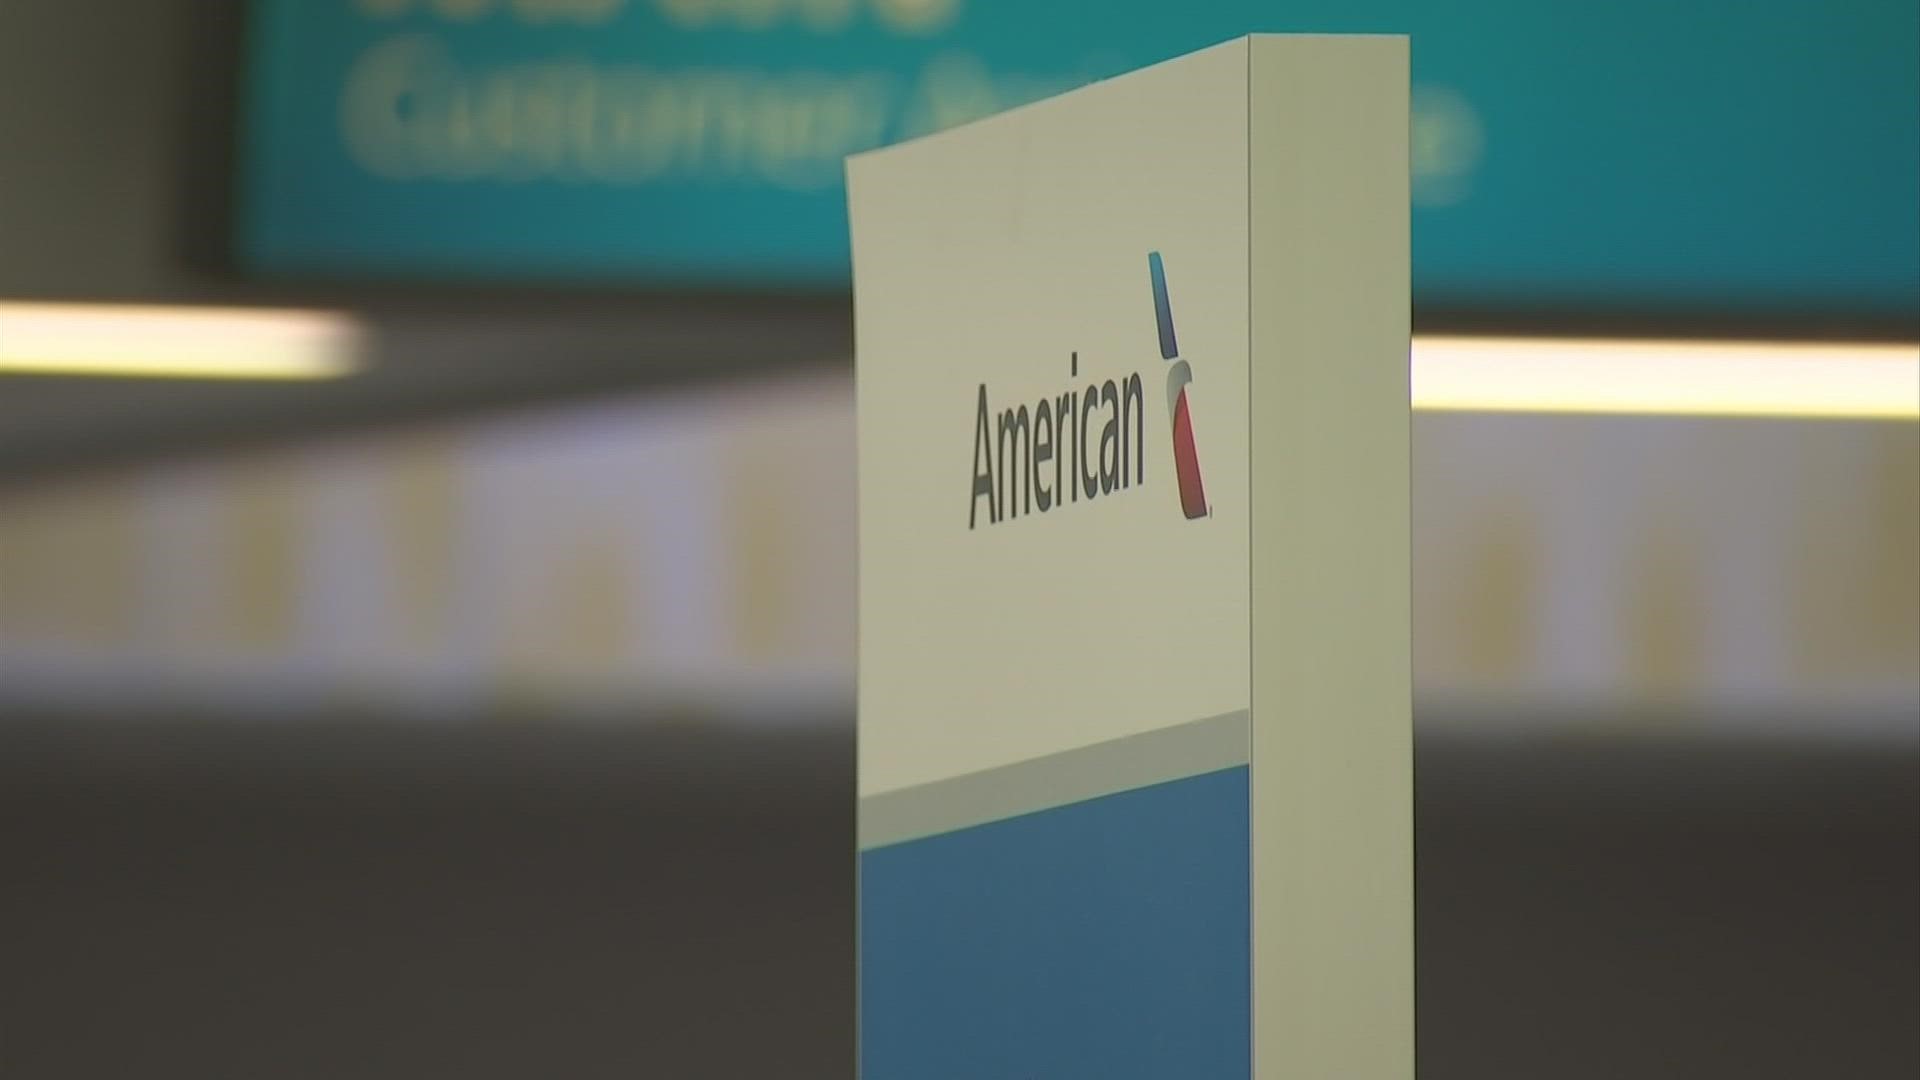 A website was posing as an American Airlines job site. A woman who received a text message with the phony link is hoping this doesn’t happen again.